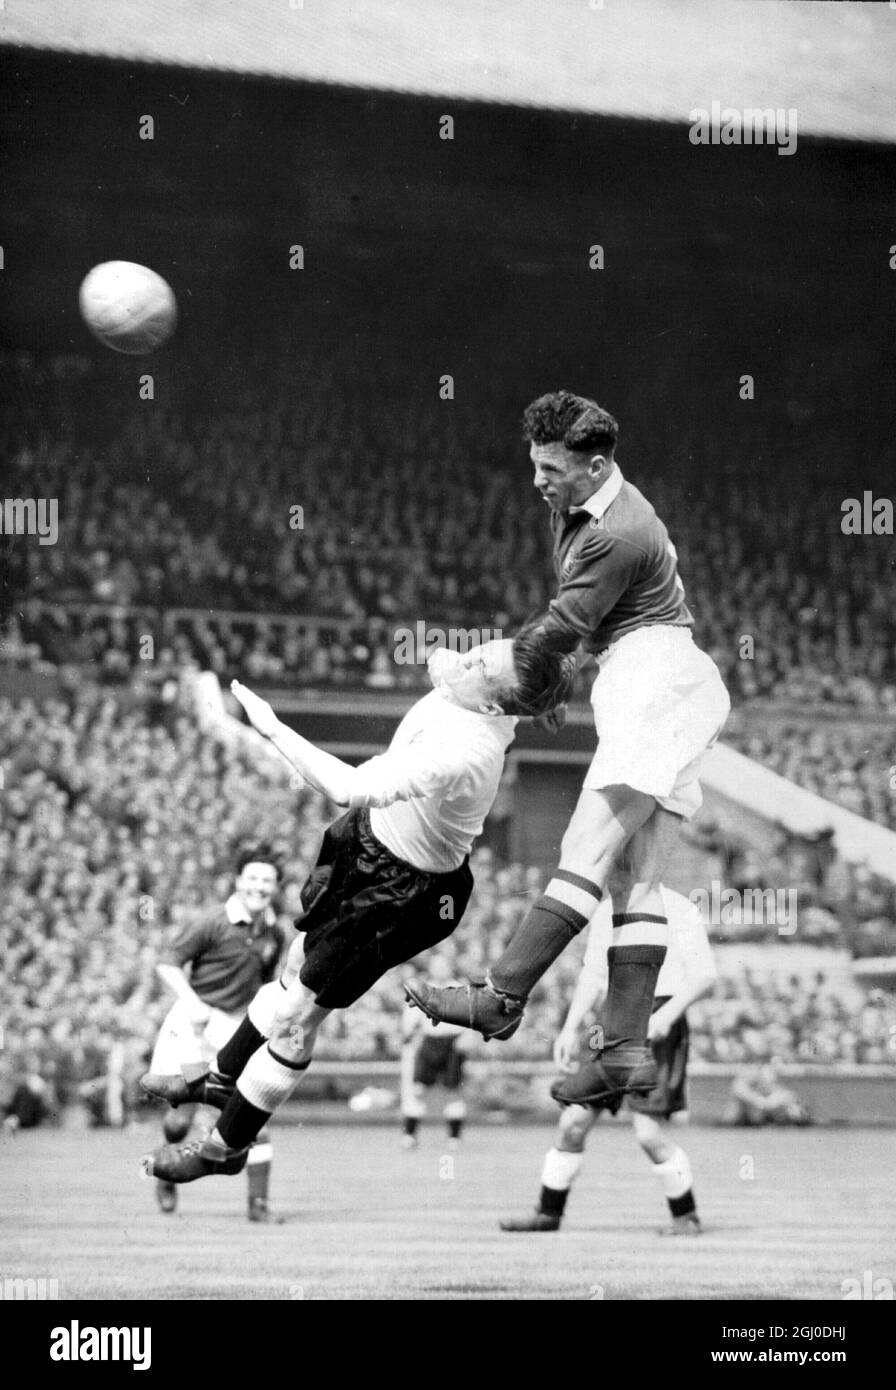 1948 FA Cup Final Manchester United v Blackpool Jack Rowley (dark shirt) of Manchester United challenges Hayward the Blackpool centre half as heads the ball towards the Blackpool goal during a corner kick. 24th April 1948. Stock Photo